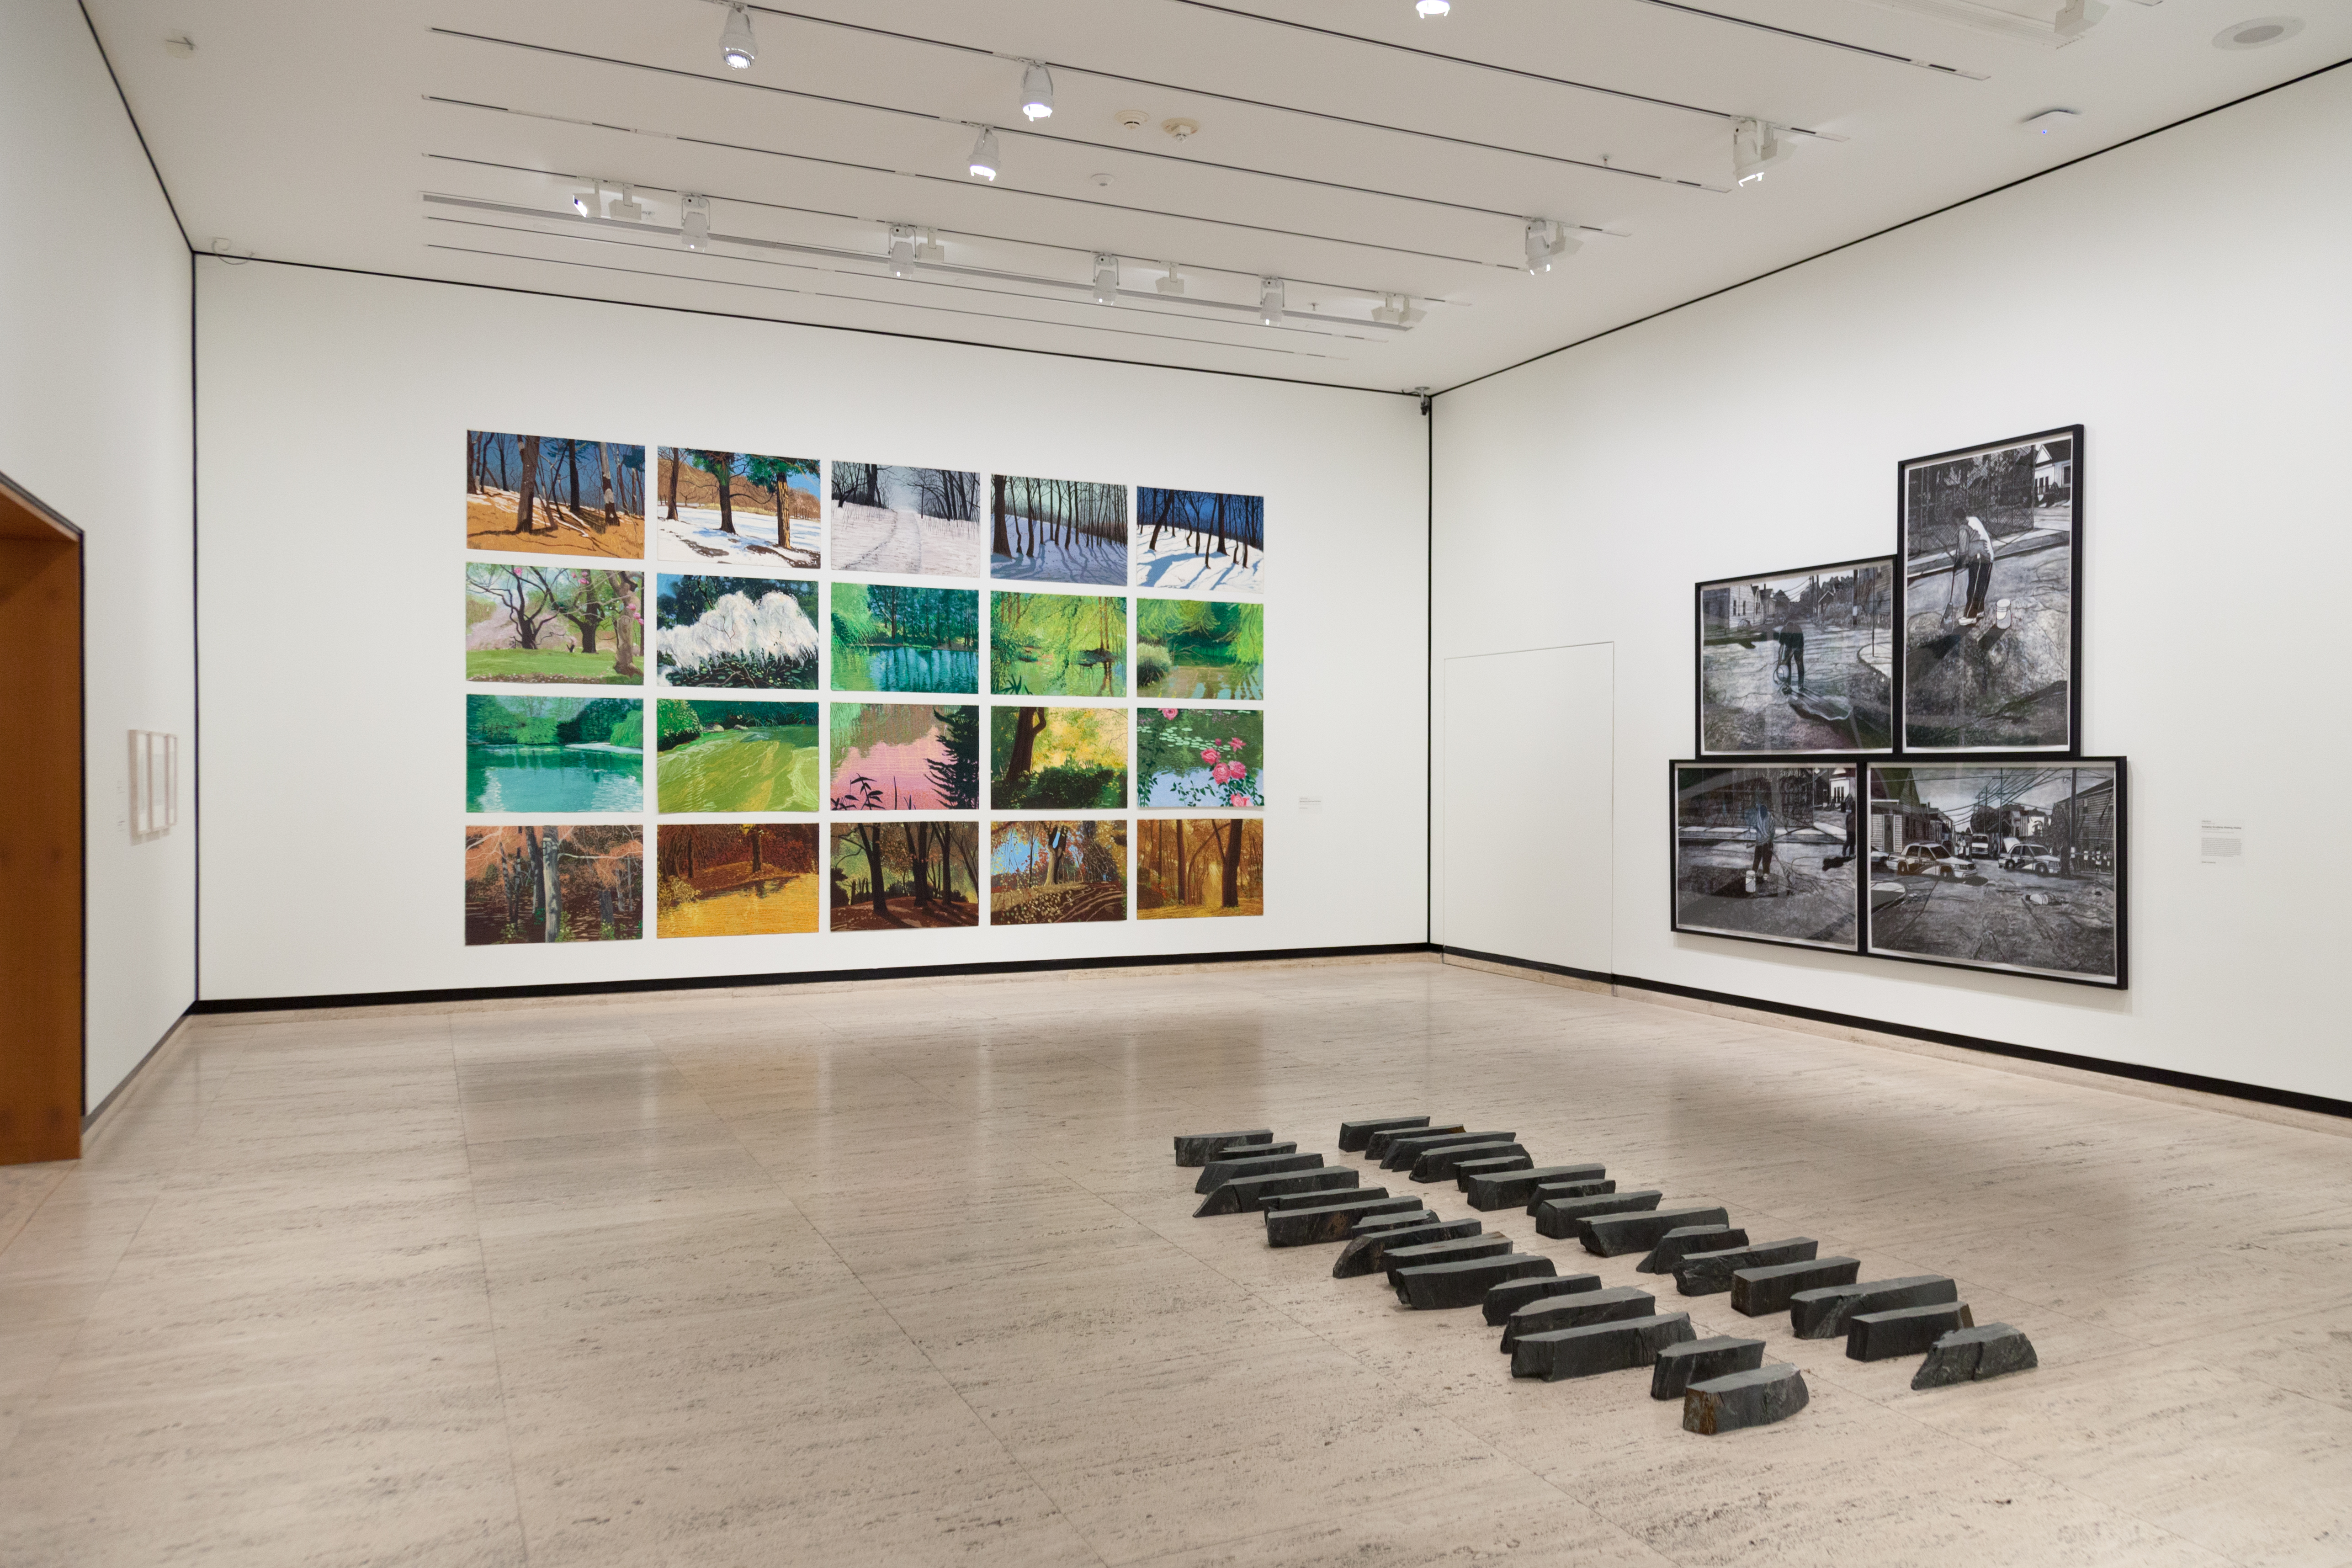 The exhibition "Approaching Landscape" is on view at Sheldon through December 31.